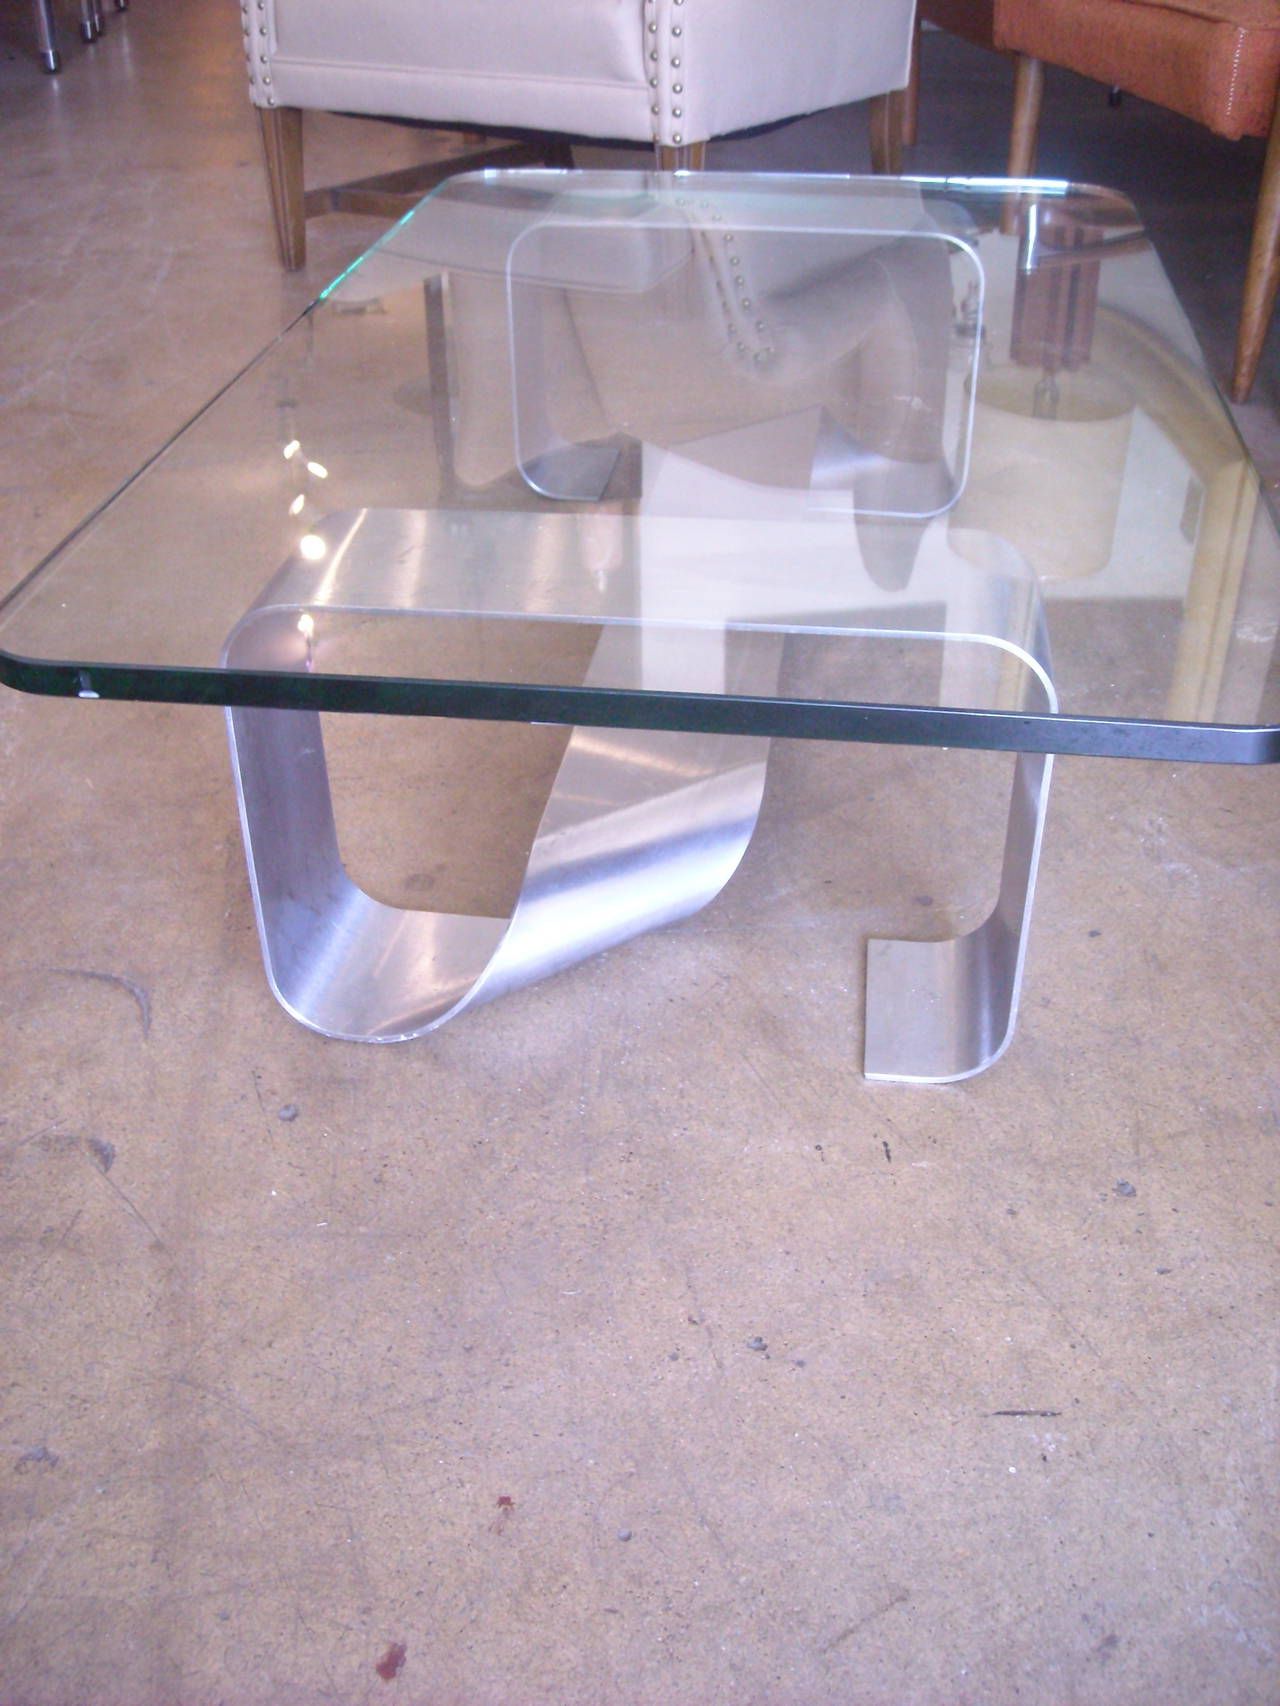 Most Popular Stainless Steel Cocktail Tables Within Francois Monnet Stainless Steel Coffee Or Cocktail Table And Glass Top (View 8 of 10)